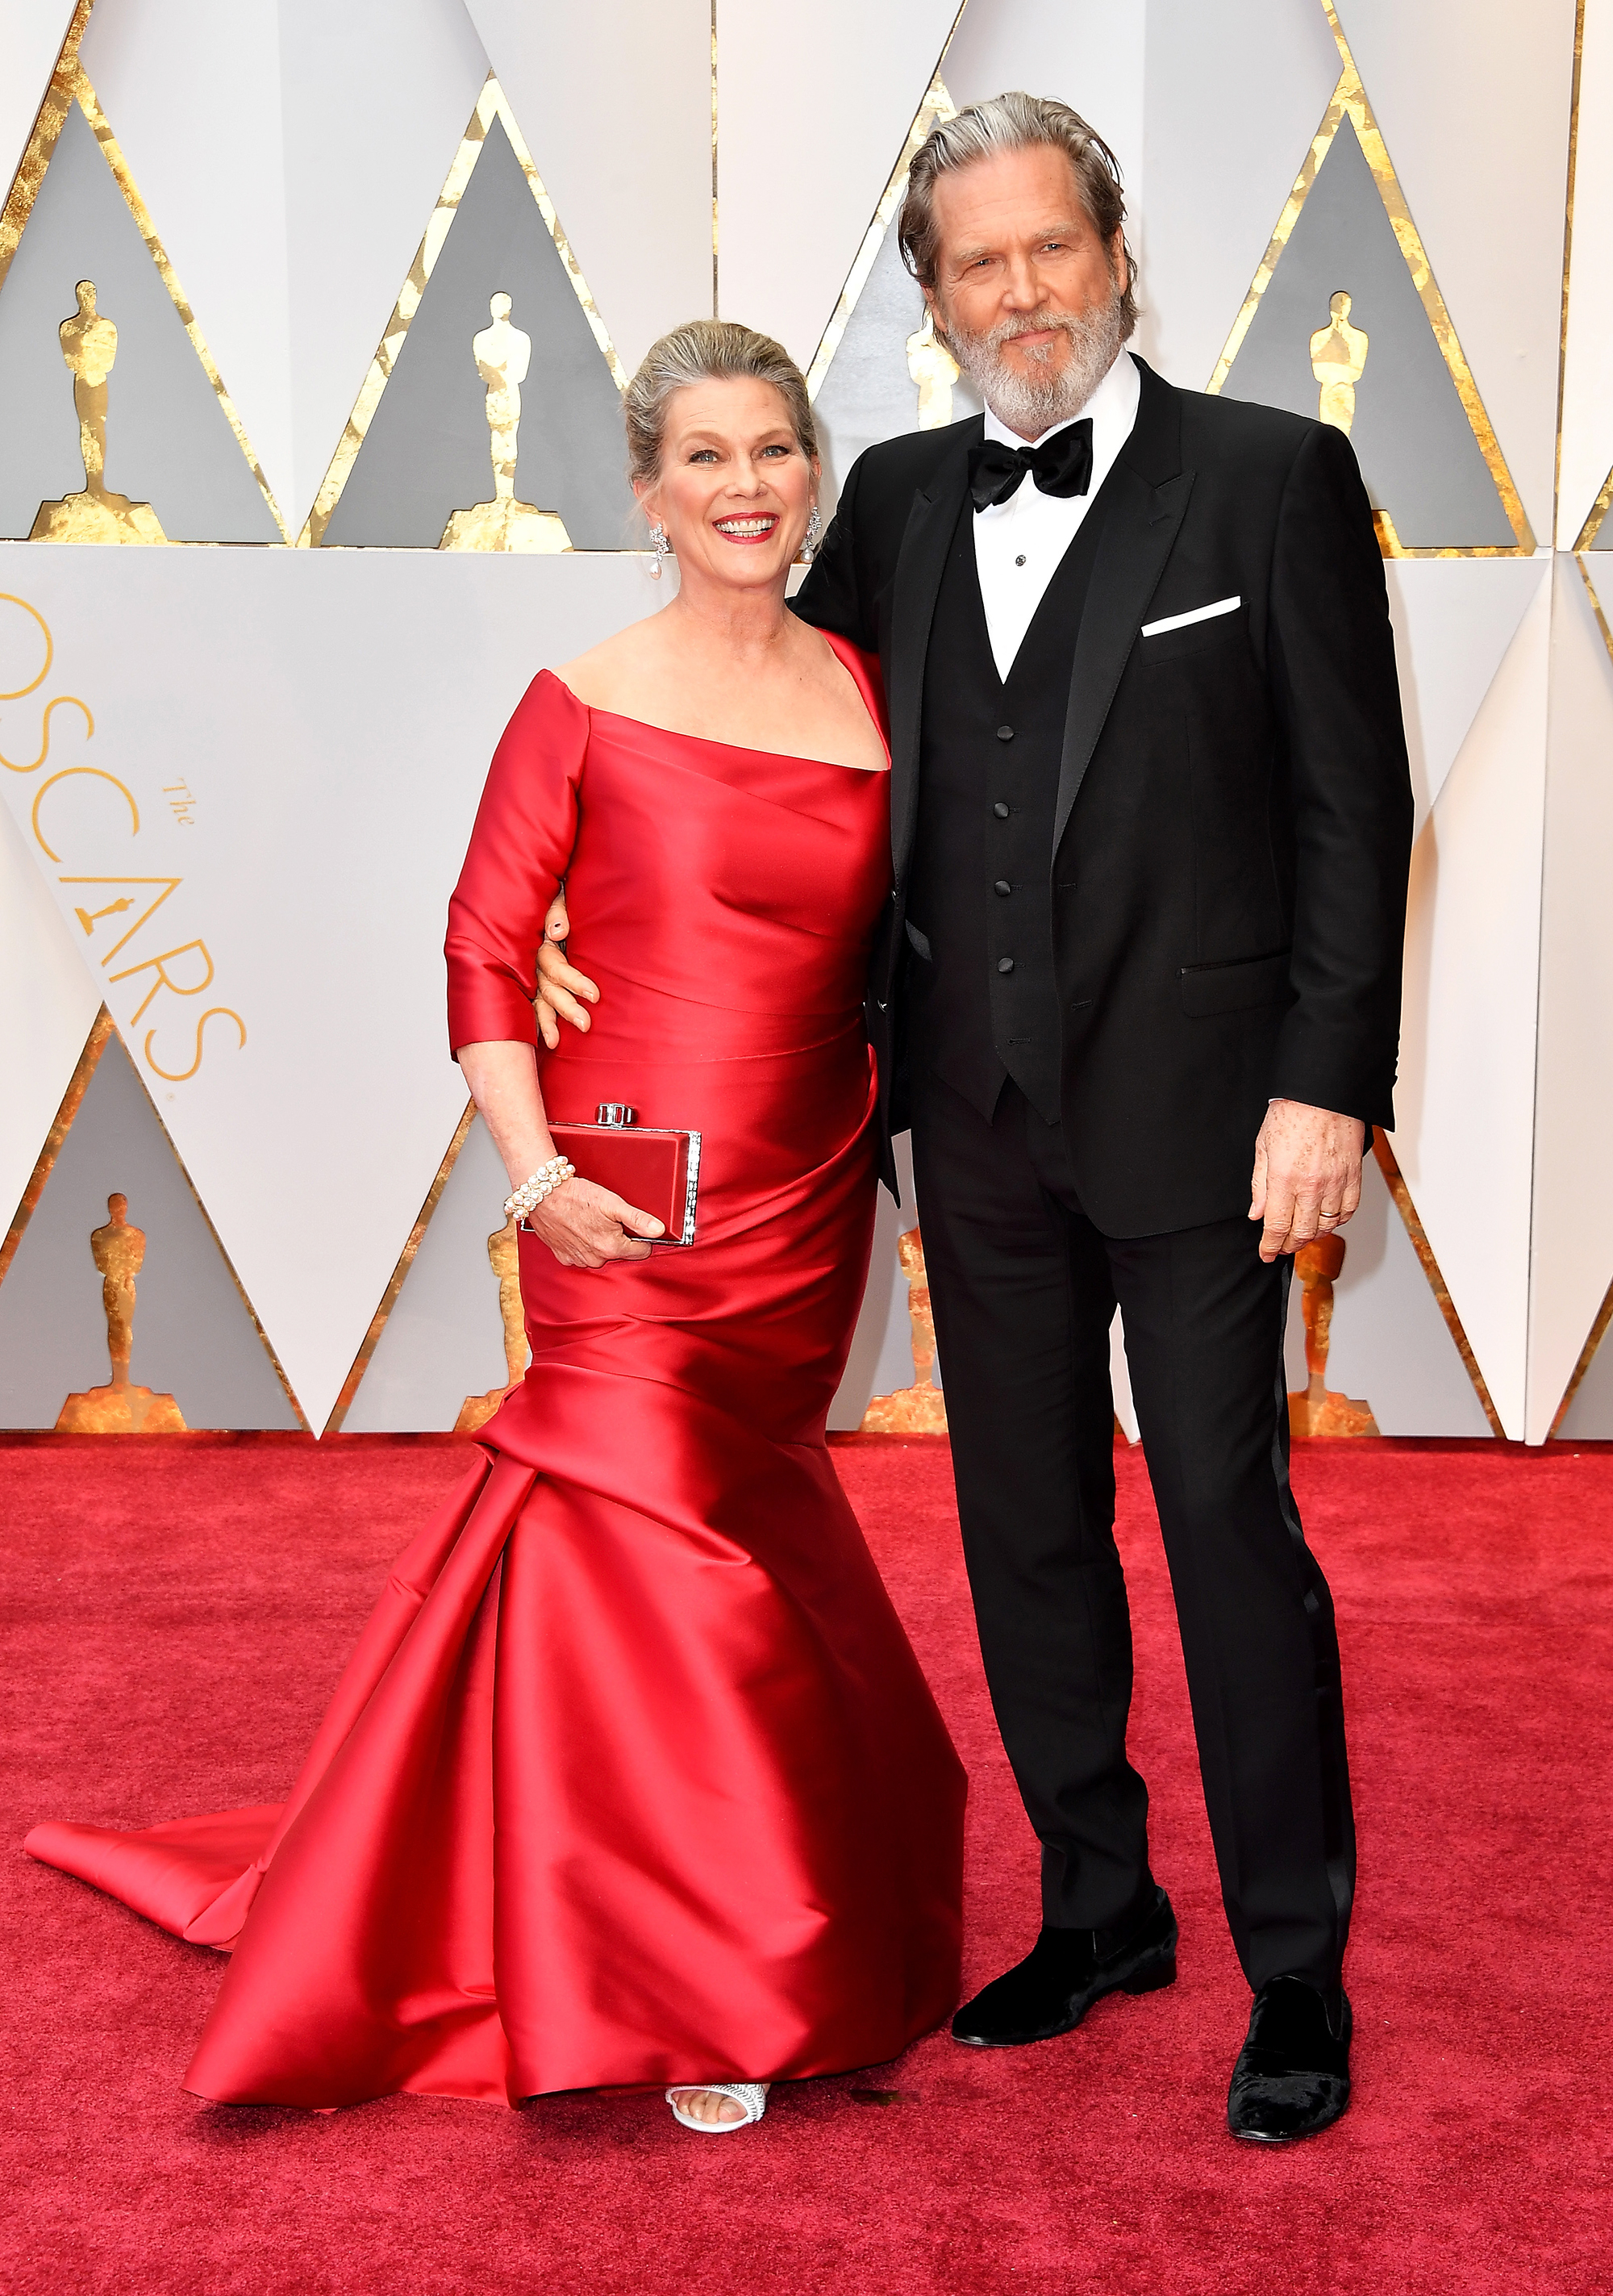 Susan Geston and Jeff Bridges on the red carpet for the 89th Oscars, on Feb. 26, 2017 in Hollywood, Calif.